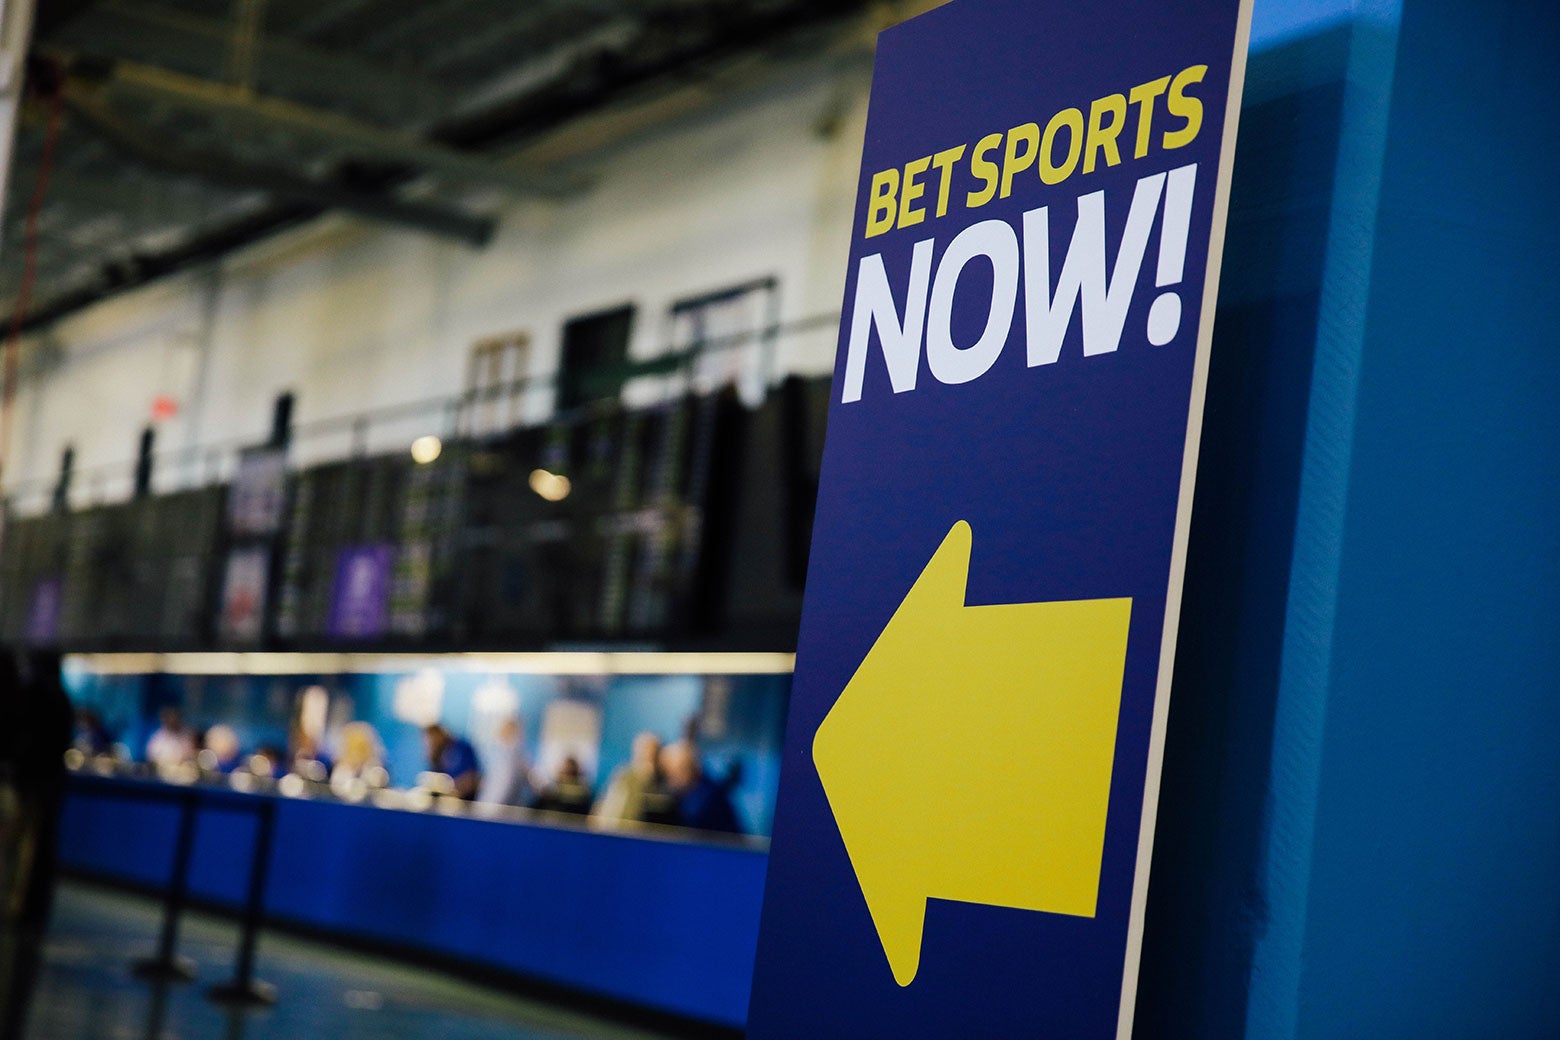 "Bet Sports Now!" sign at The Monmouth Park Sports Book is viewed on the first day of legal sports betting in New Jersey on June 14.